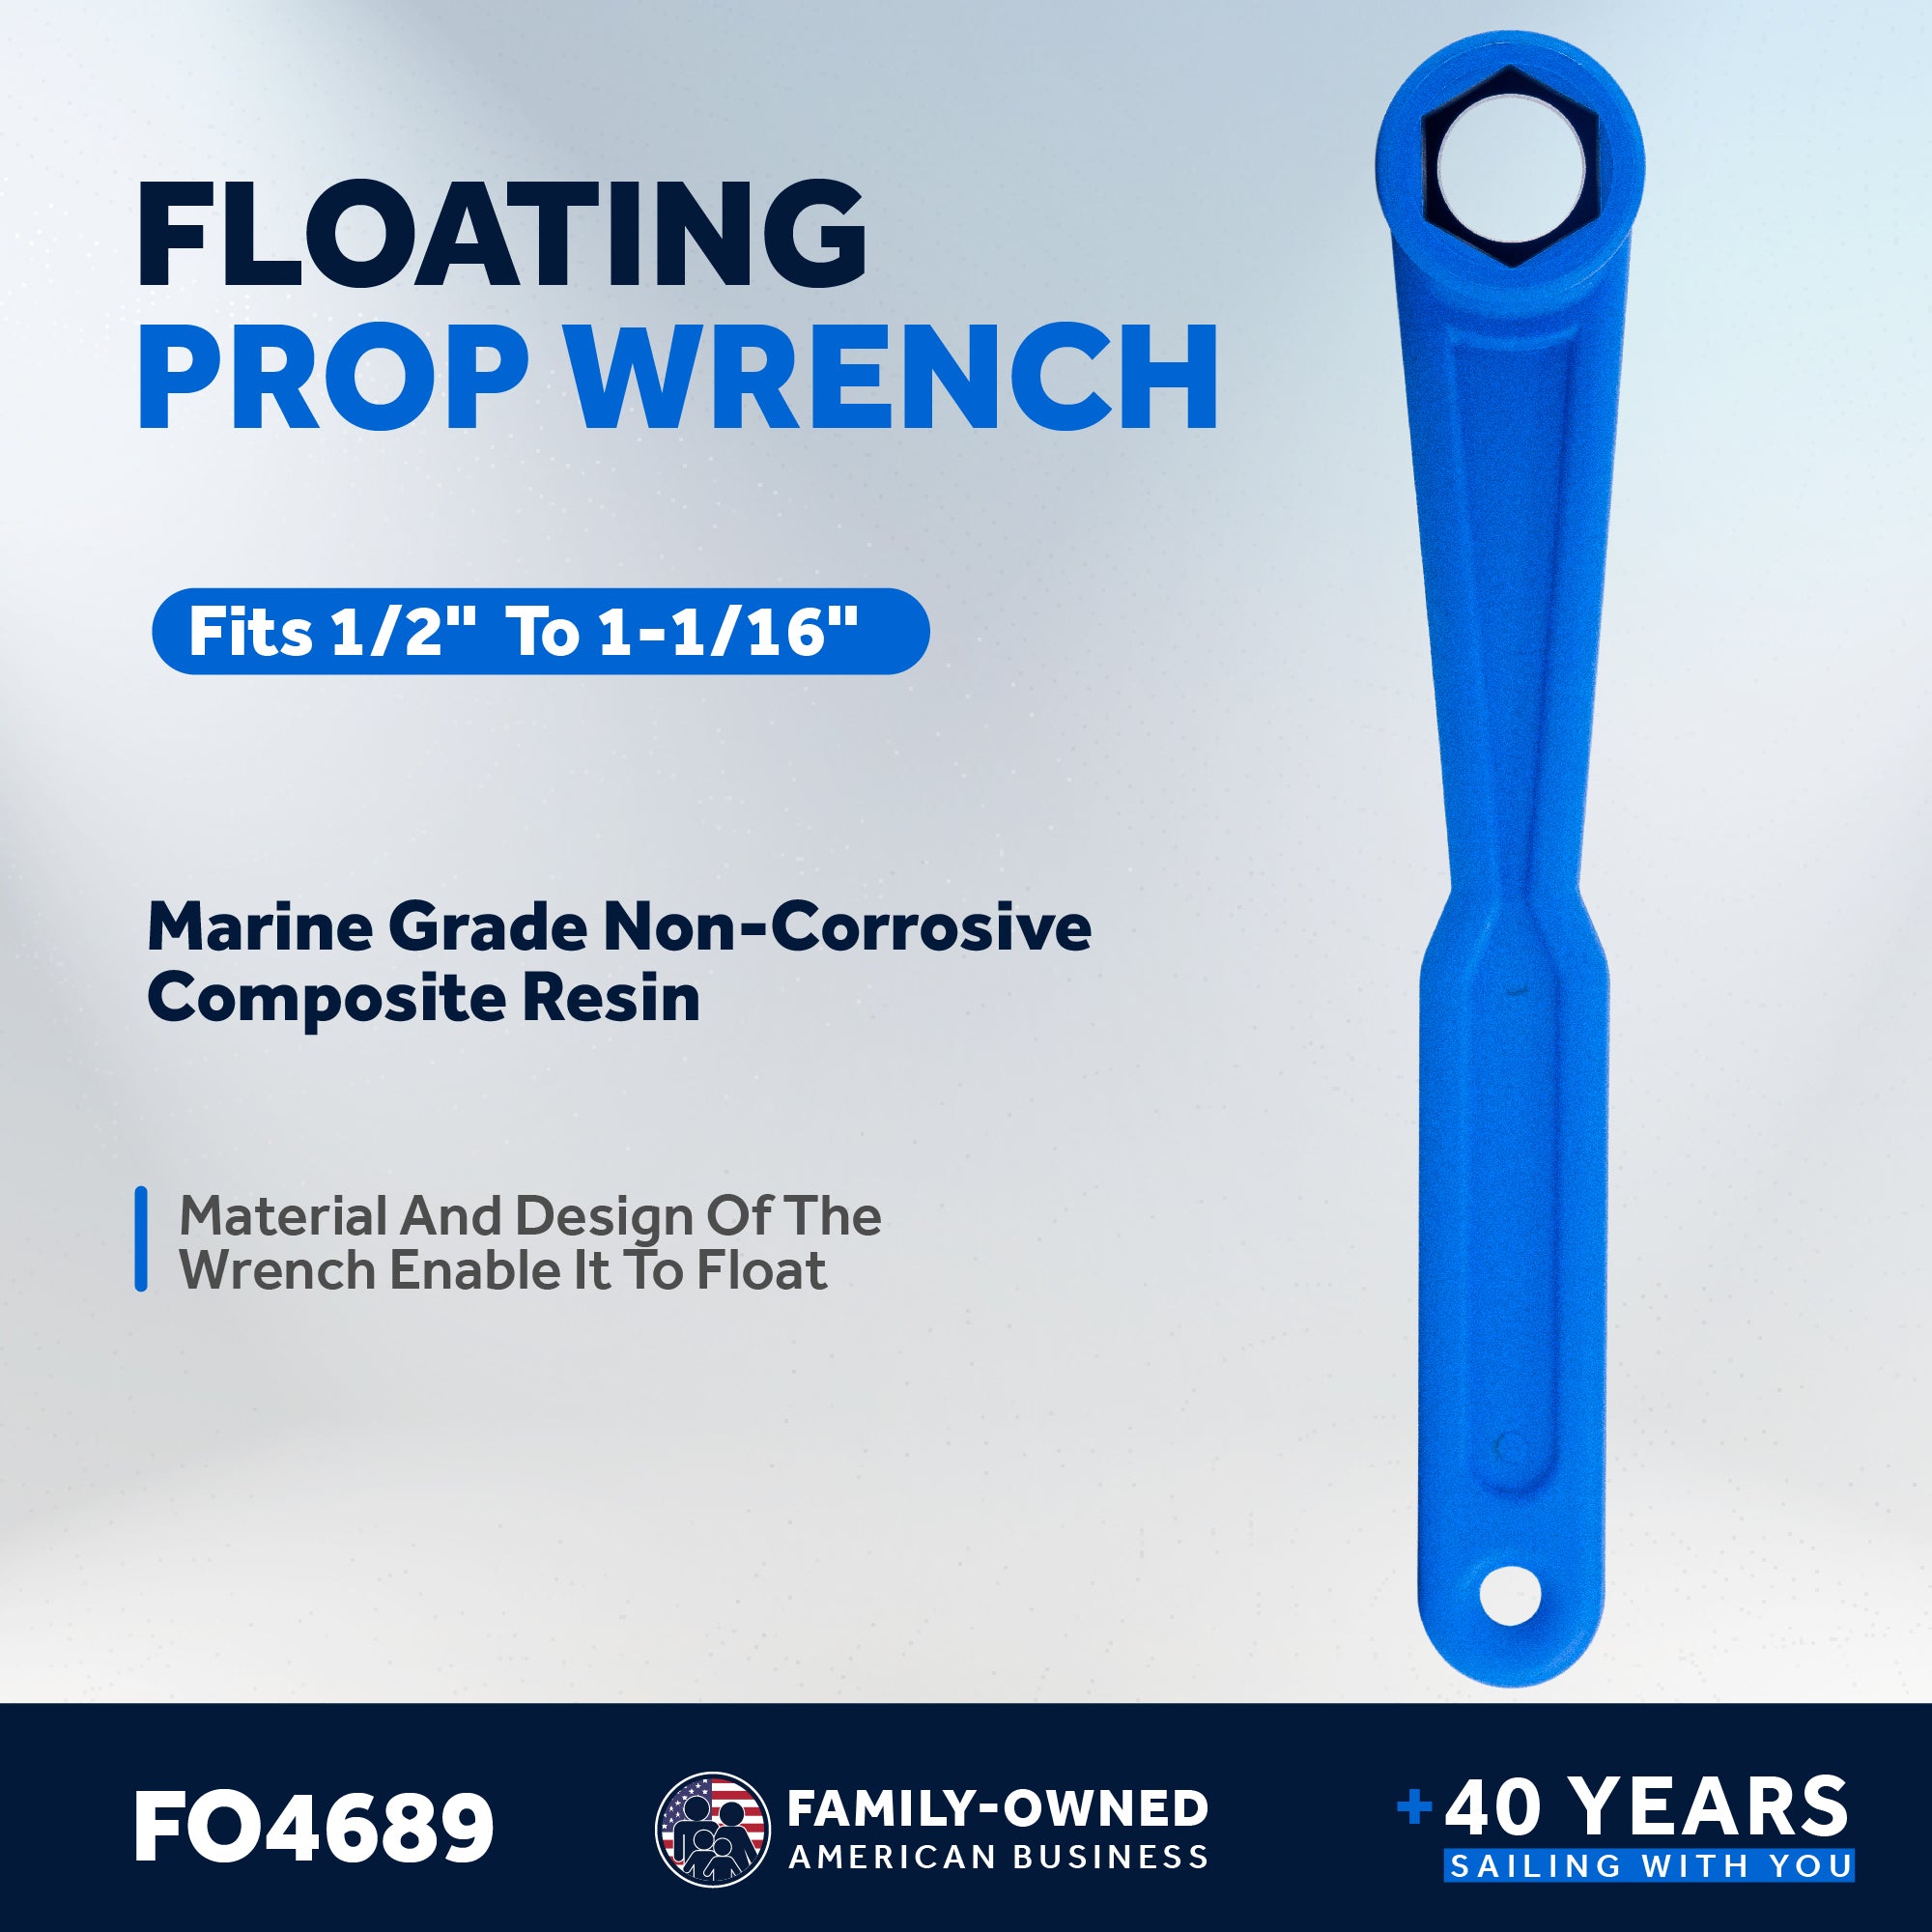 Universal Floating Prop Wrench Kit with Multiple Sockets - FO4689